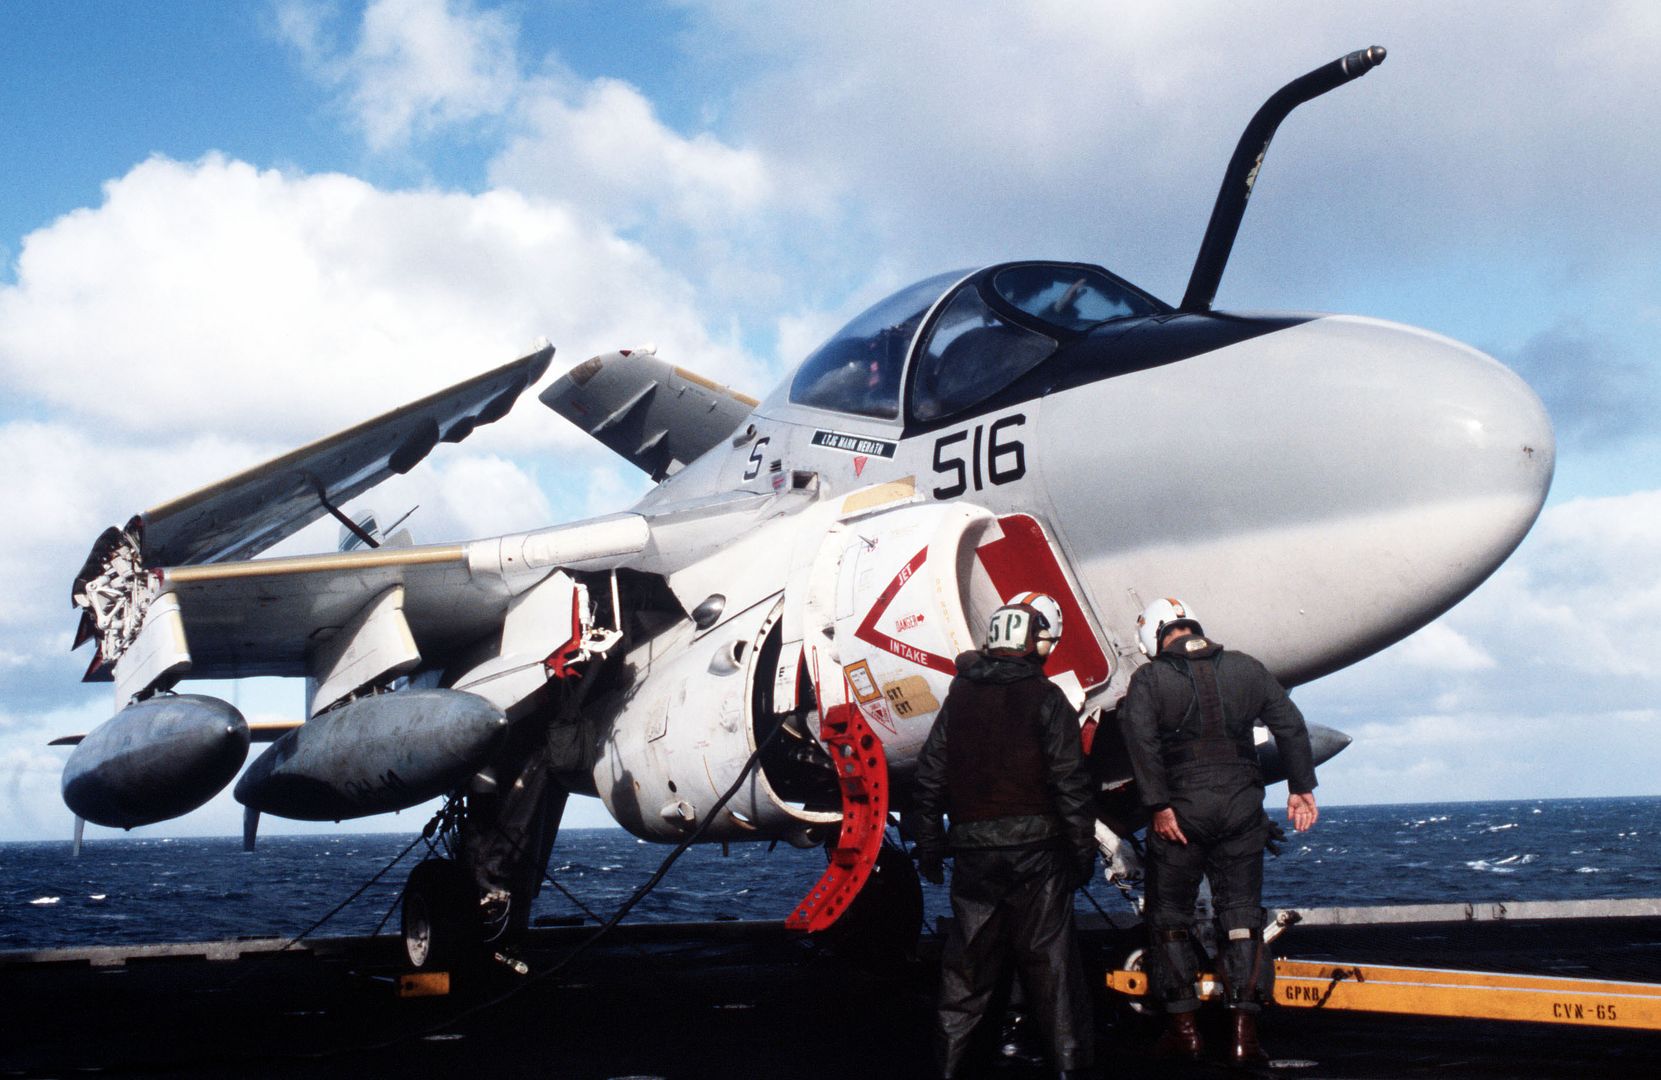 The Pilot And Bombardier Navigator Of An Attack Squadron 95 A 6E Intruder Aircraft Confer With A Maintenance Crewman On The Flight Deck Of The Nuclear Powered Aircraft Carrier USS ENTERPRISE